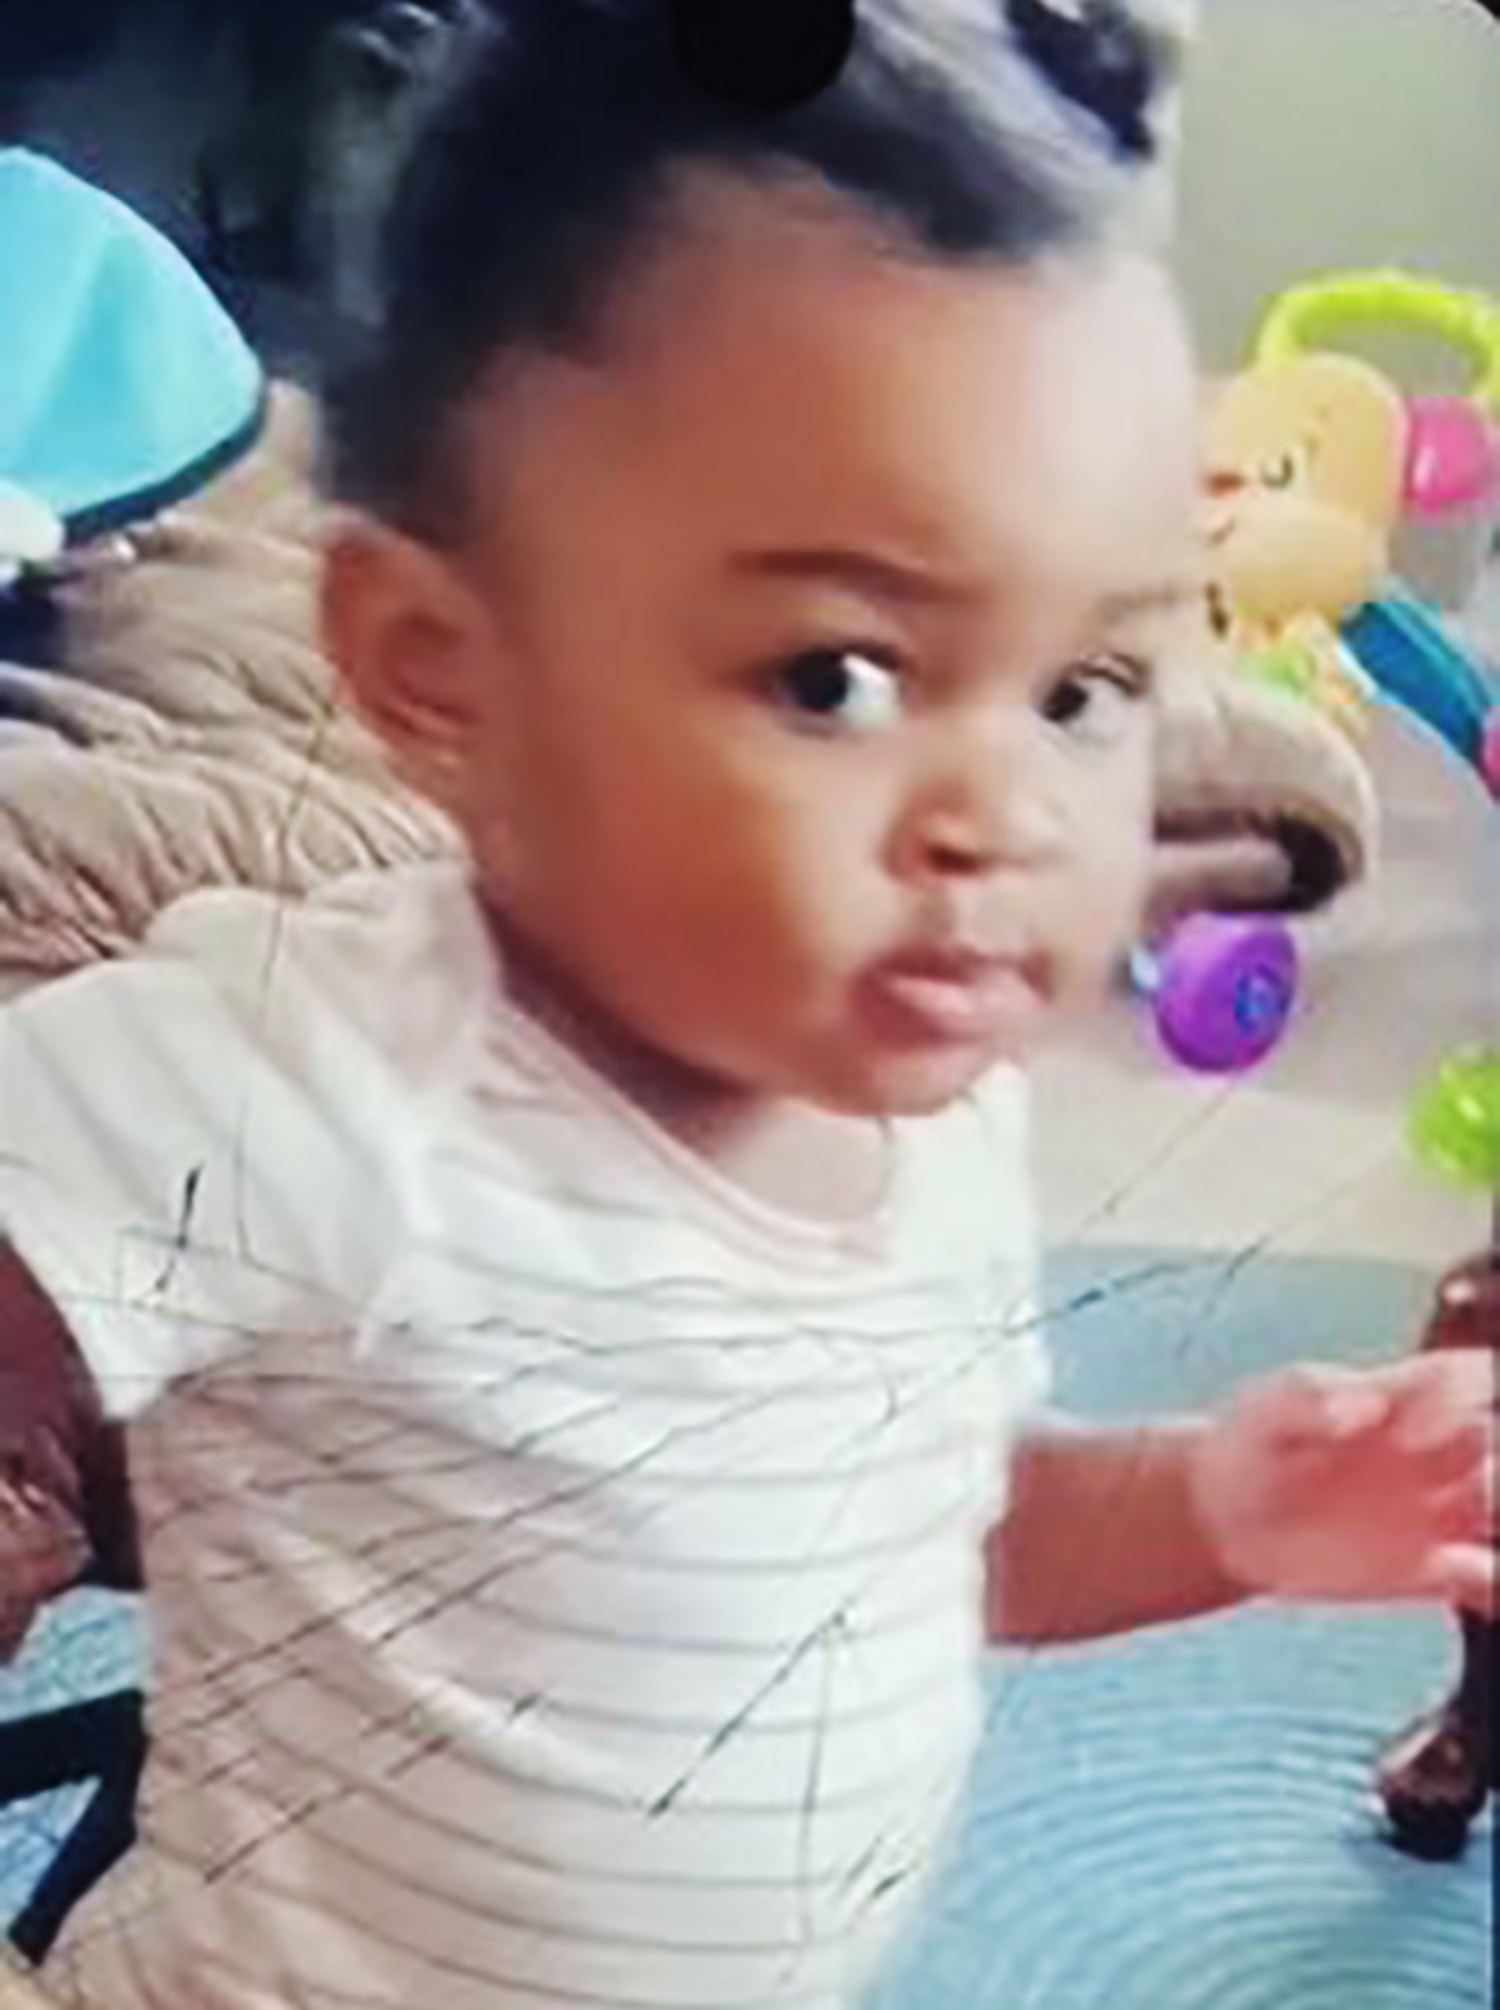 Baby girl found fatally shot after abduction by father